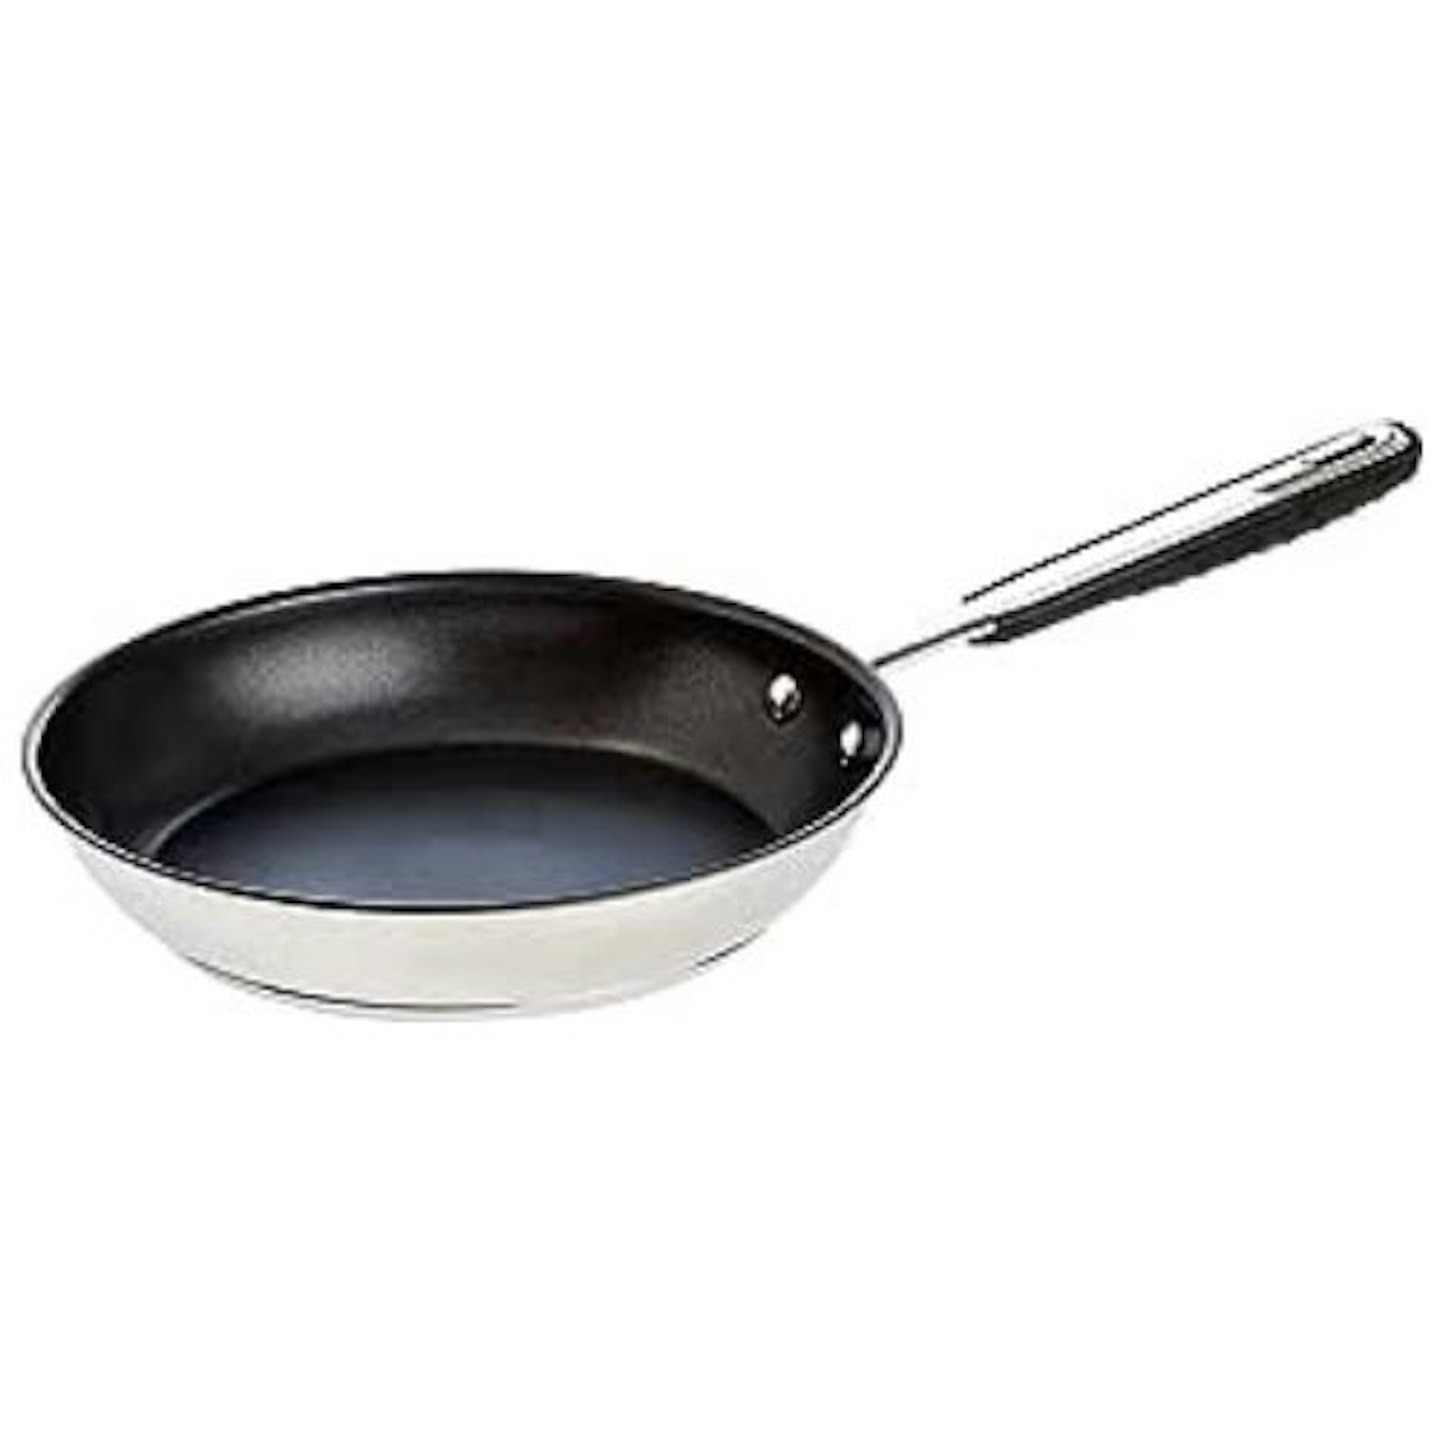 Amazon Basics Stainless Steel Frying Pan With Non-Stick Coating